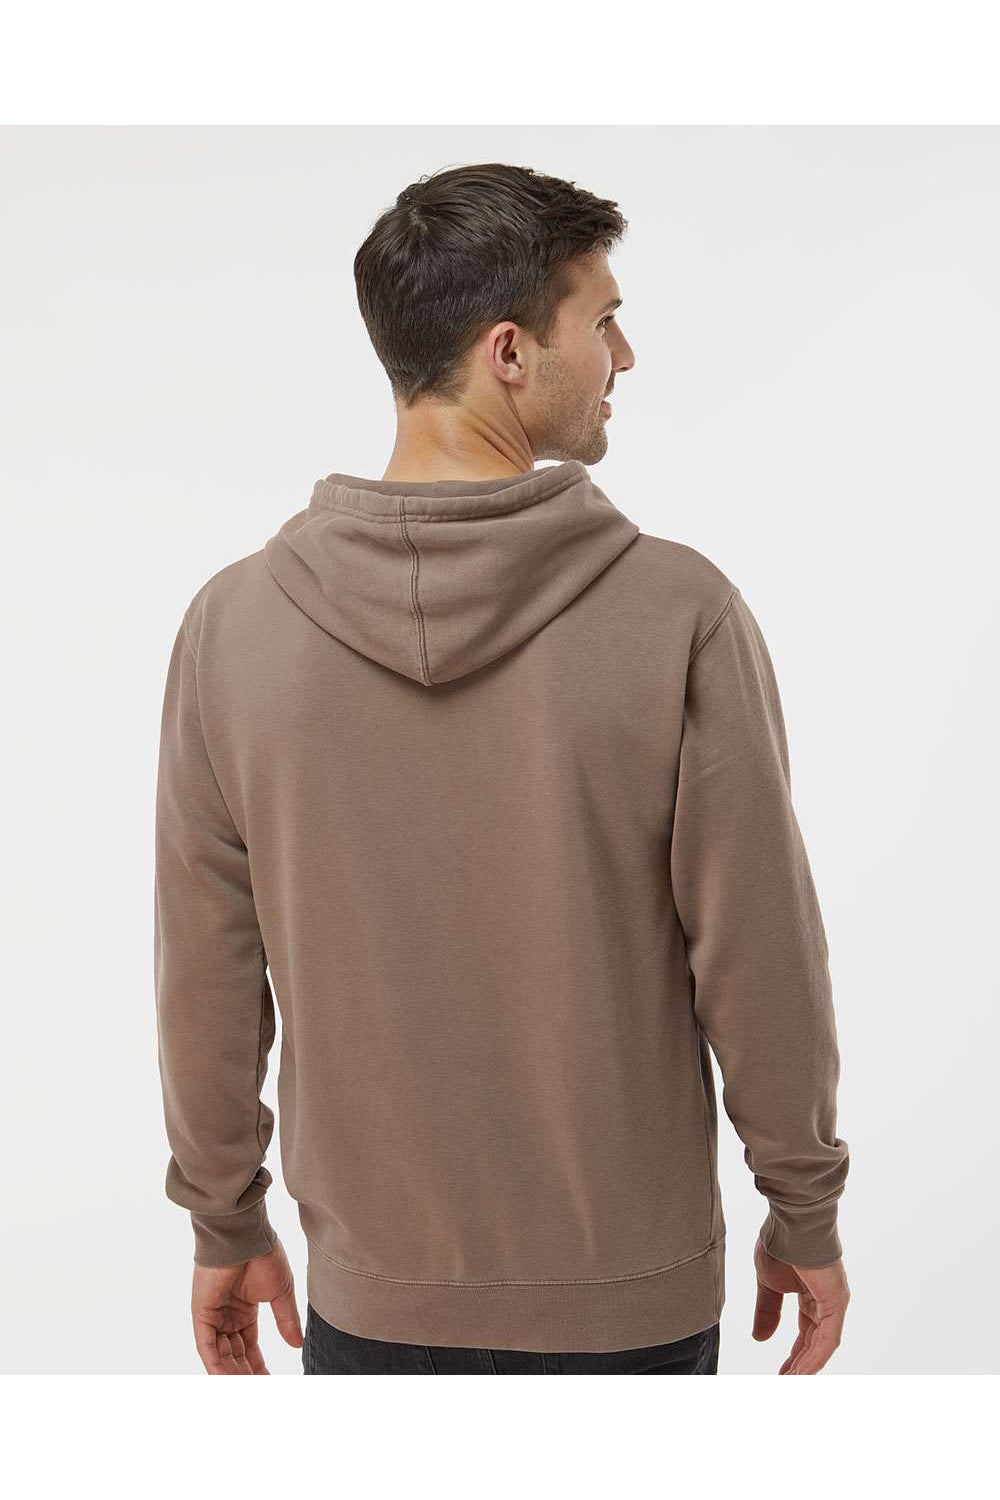 Independent Trading Co. PRM4500 Mens Pigment Dyed Hooded Sweatshirt Hoodie Clay Brown Model Back